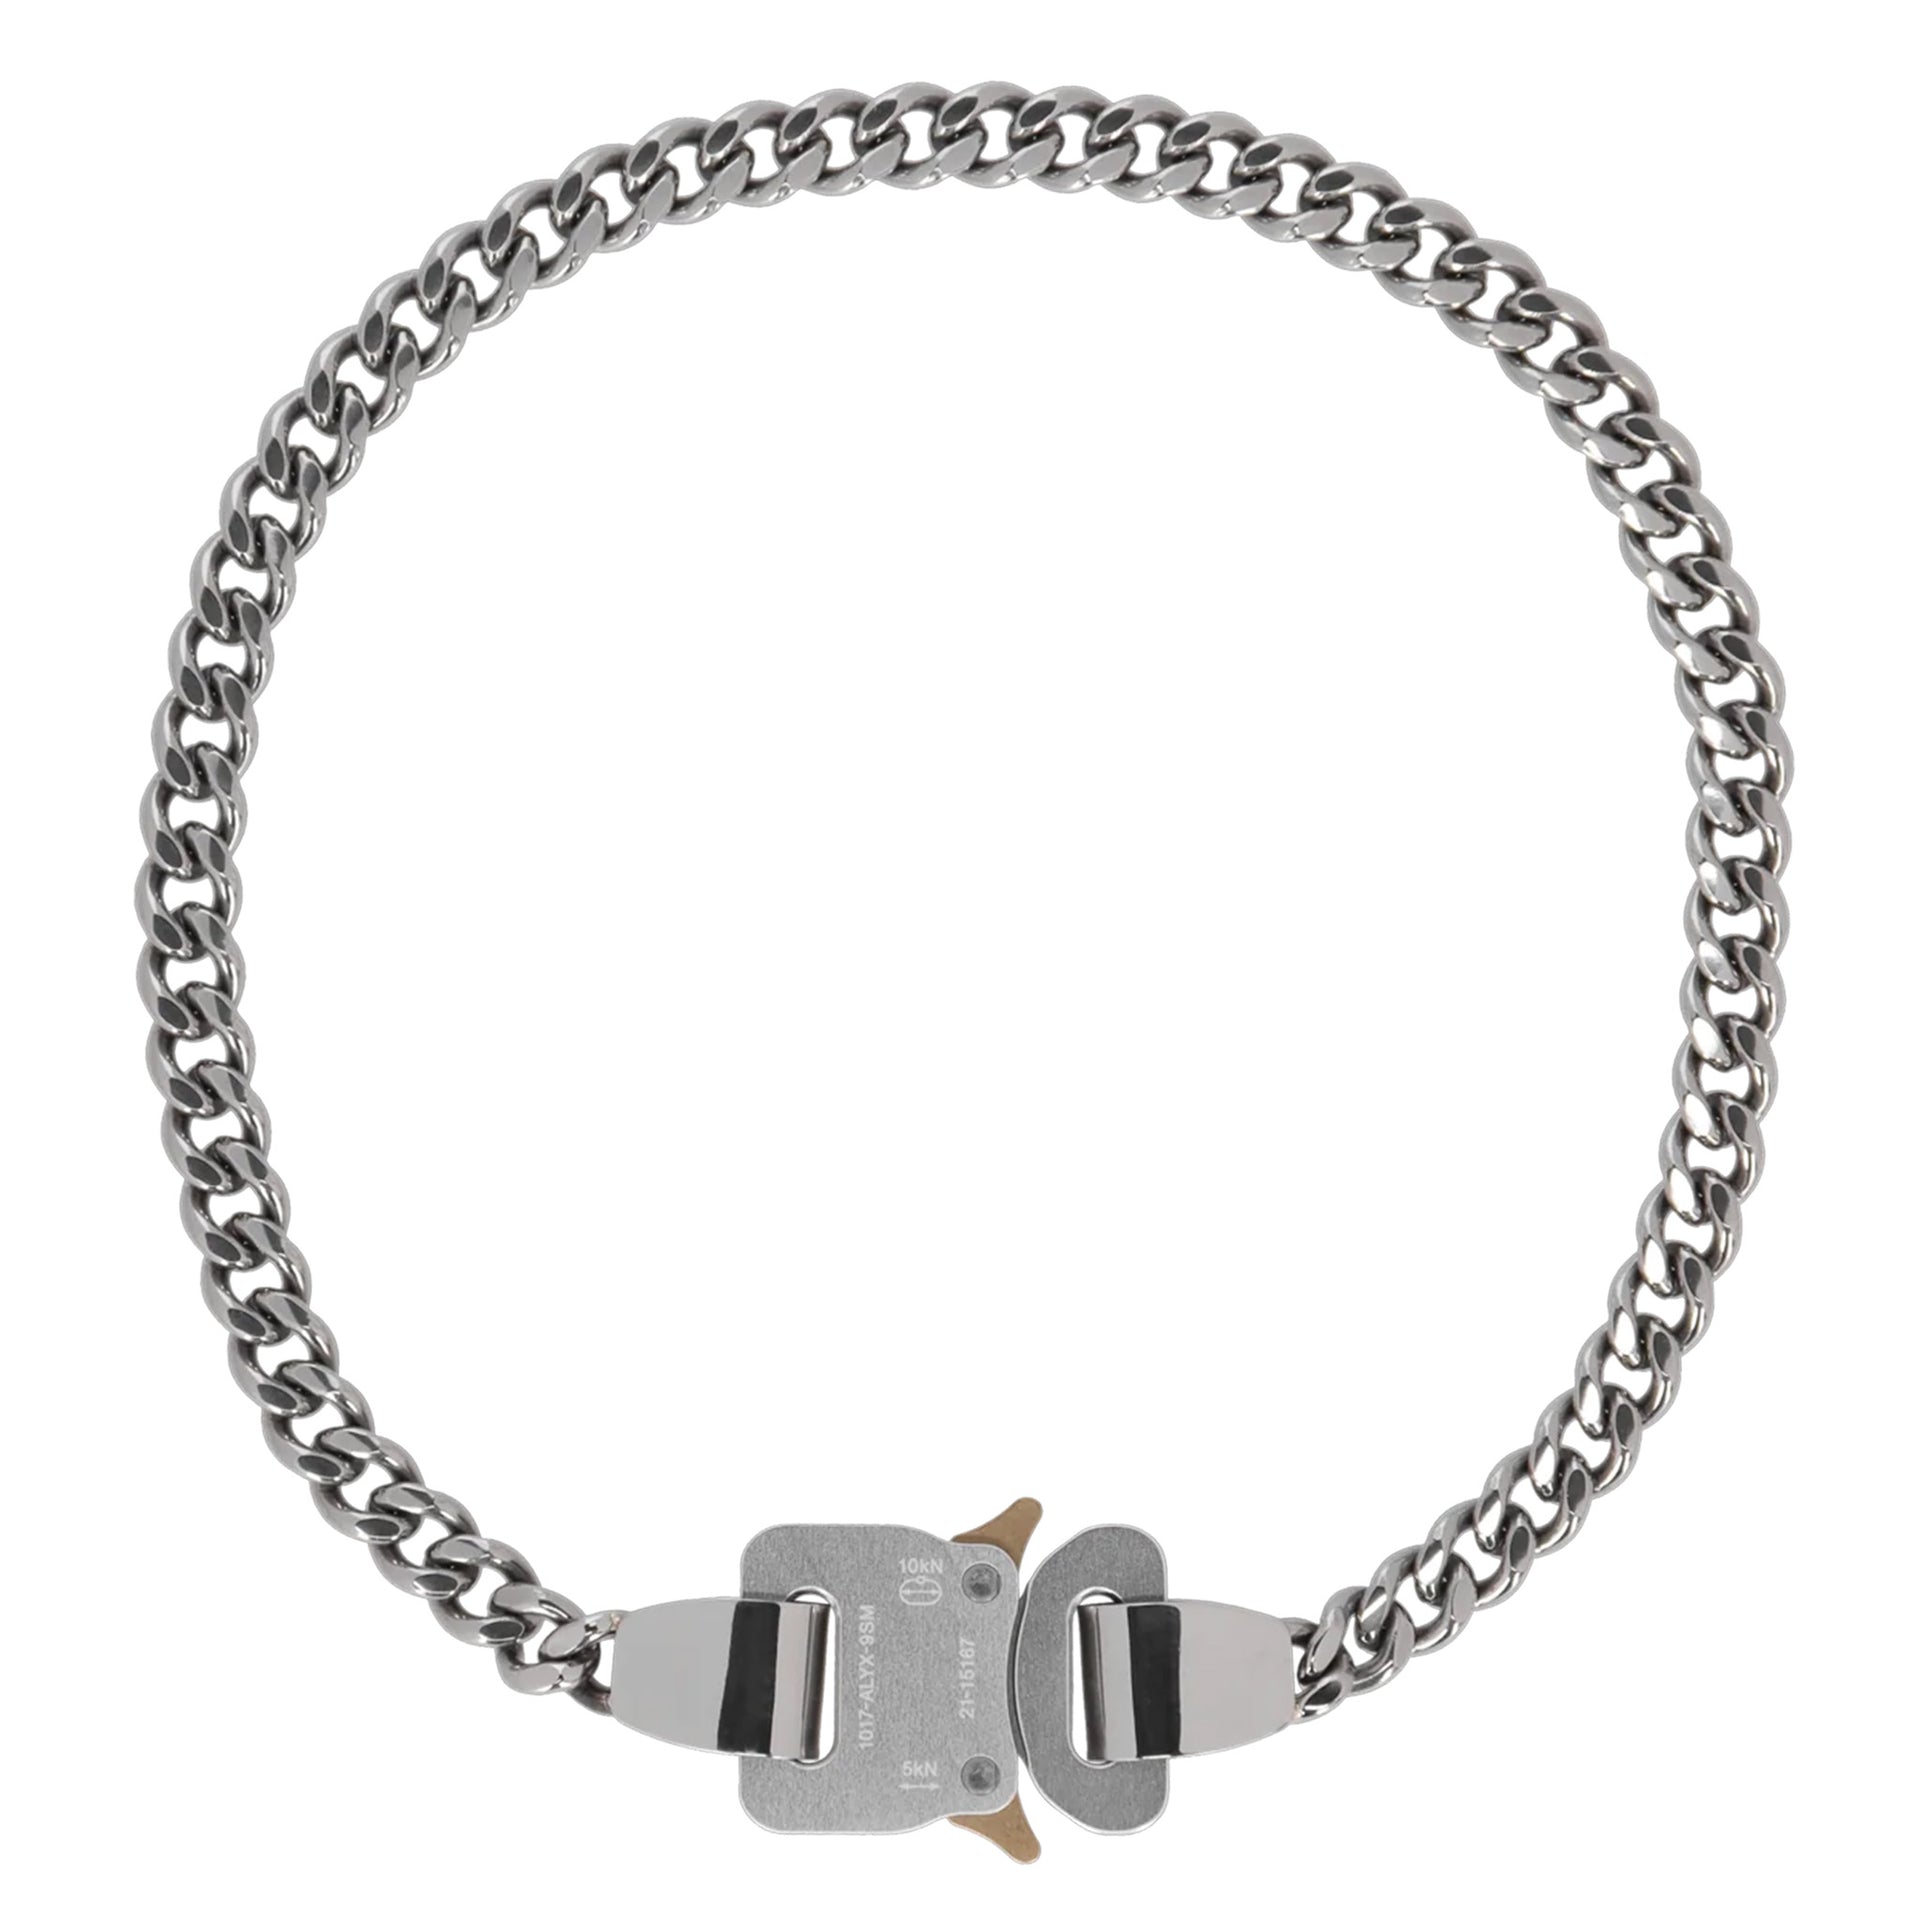 METAL BUCKLE NECKLACE / GRY0002:SILVER